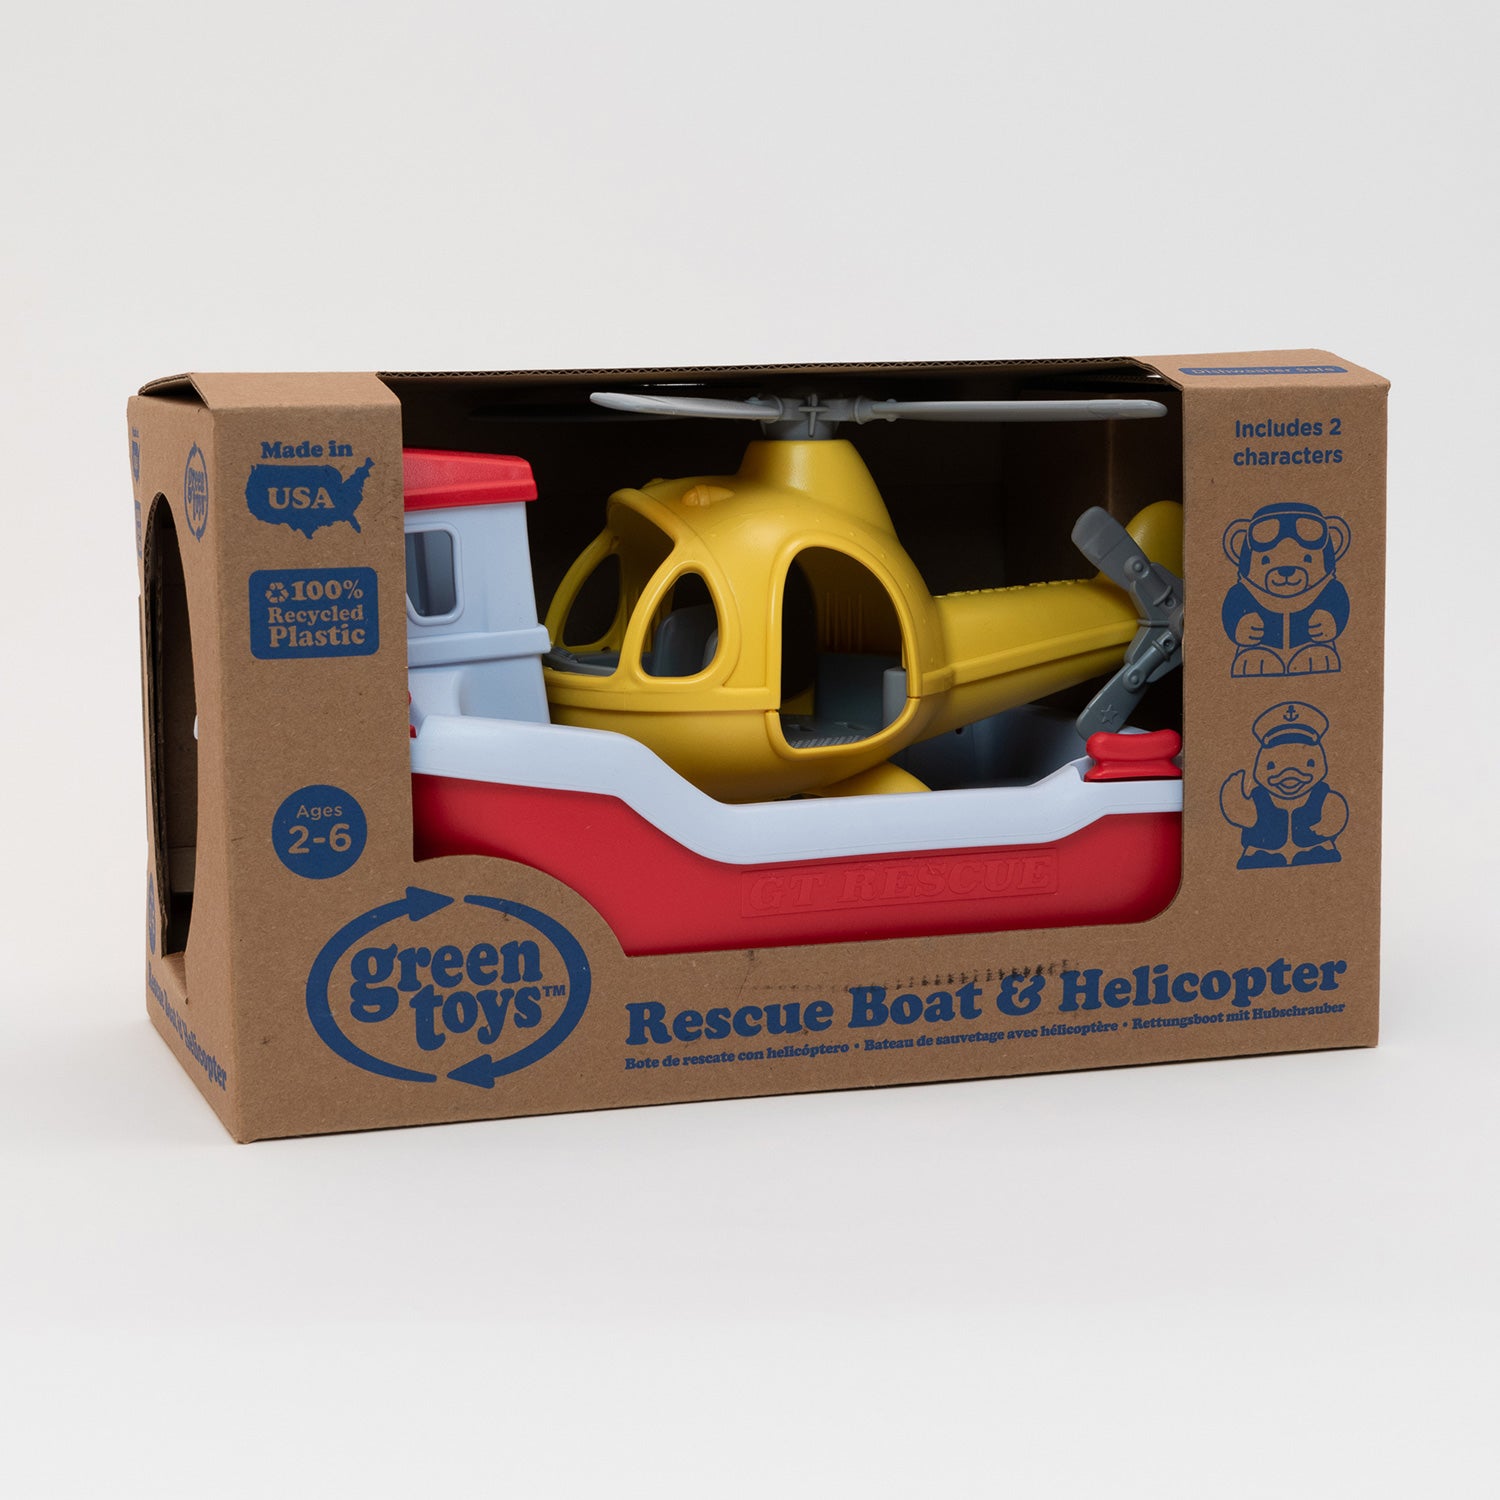 The Green Toys Rescue Boat and Helicopter packaged in a brown cardboard branded box.